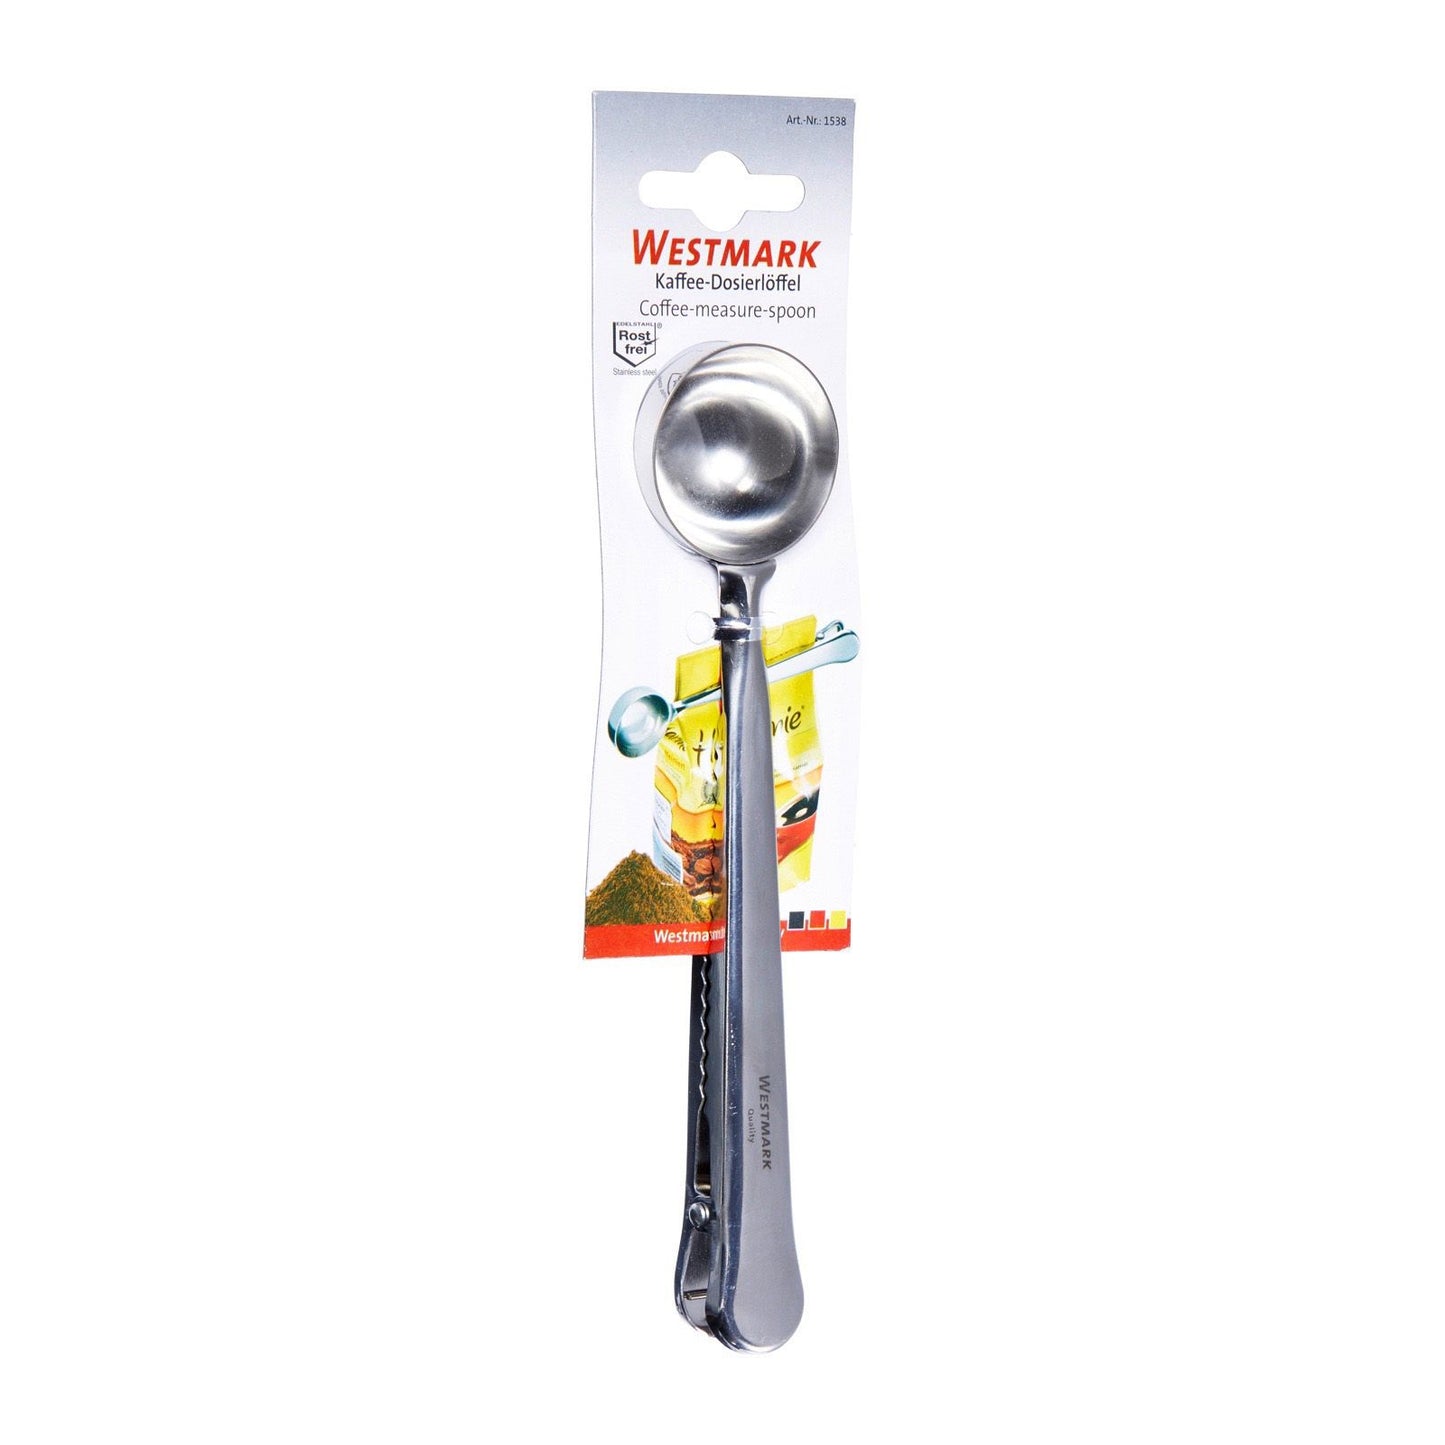 Westmark coffee scoop with sealing clip